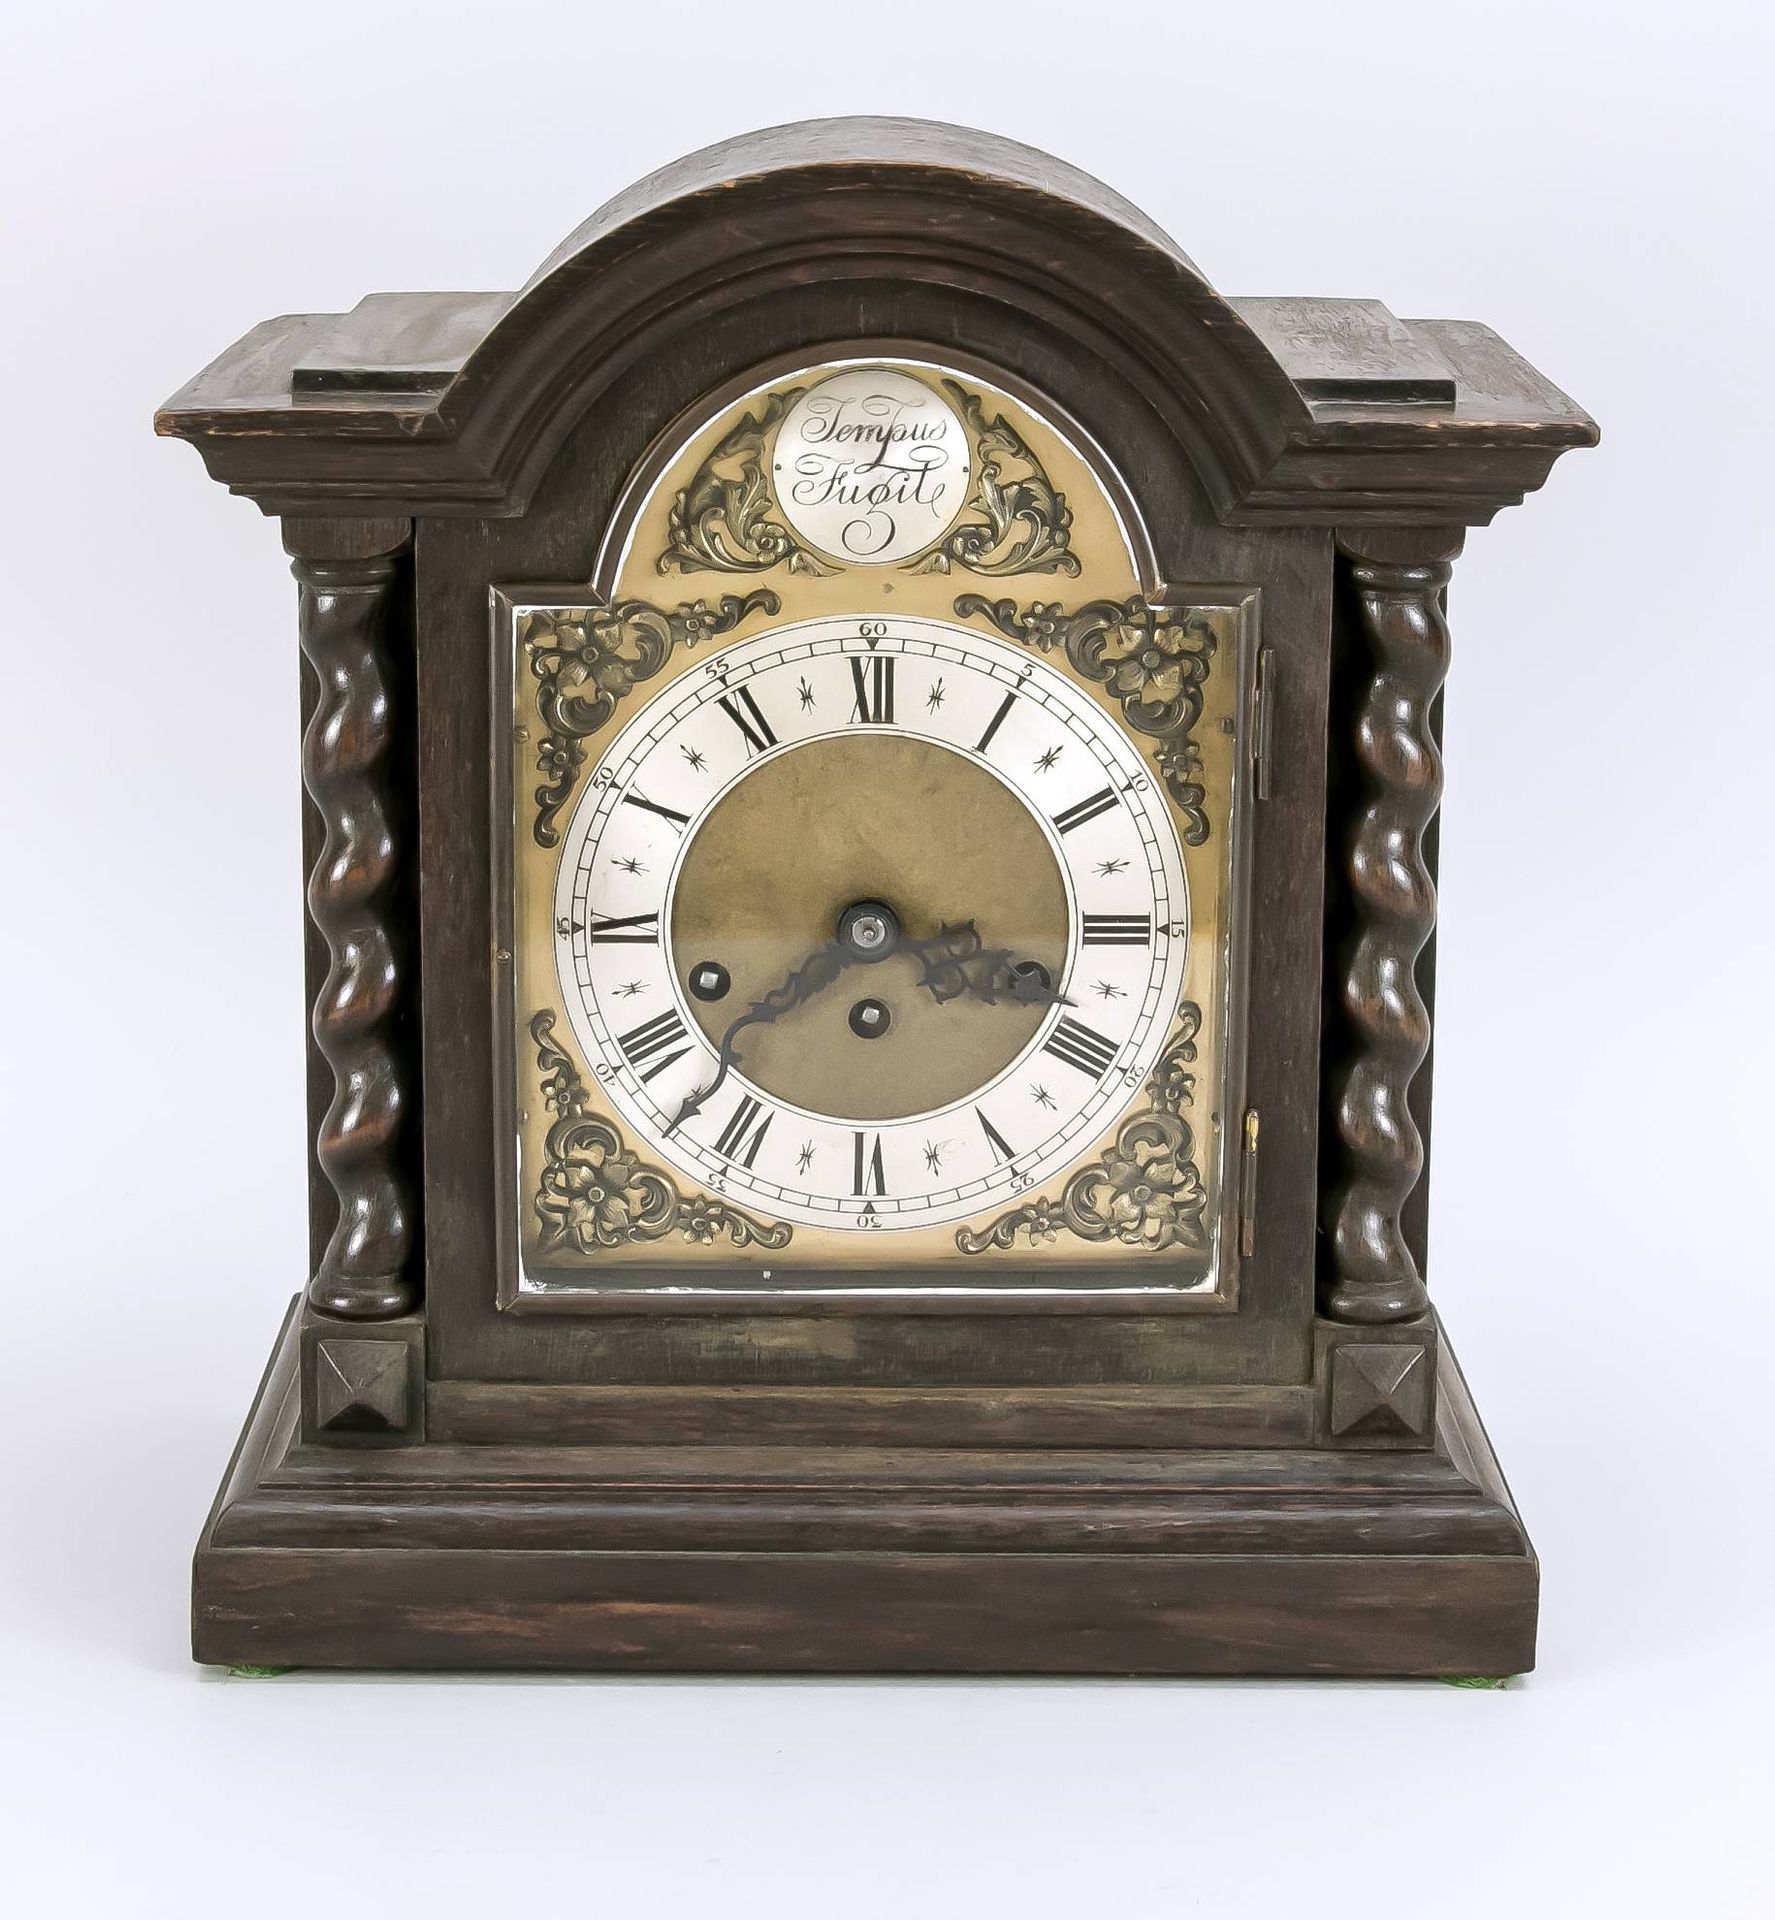 Null Junghans table clock circa 1900, oak case with arched roofing and turned co&hellip;